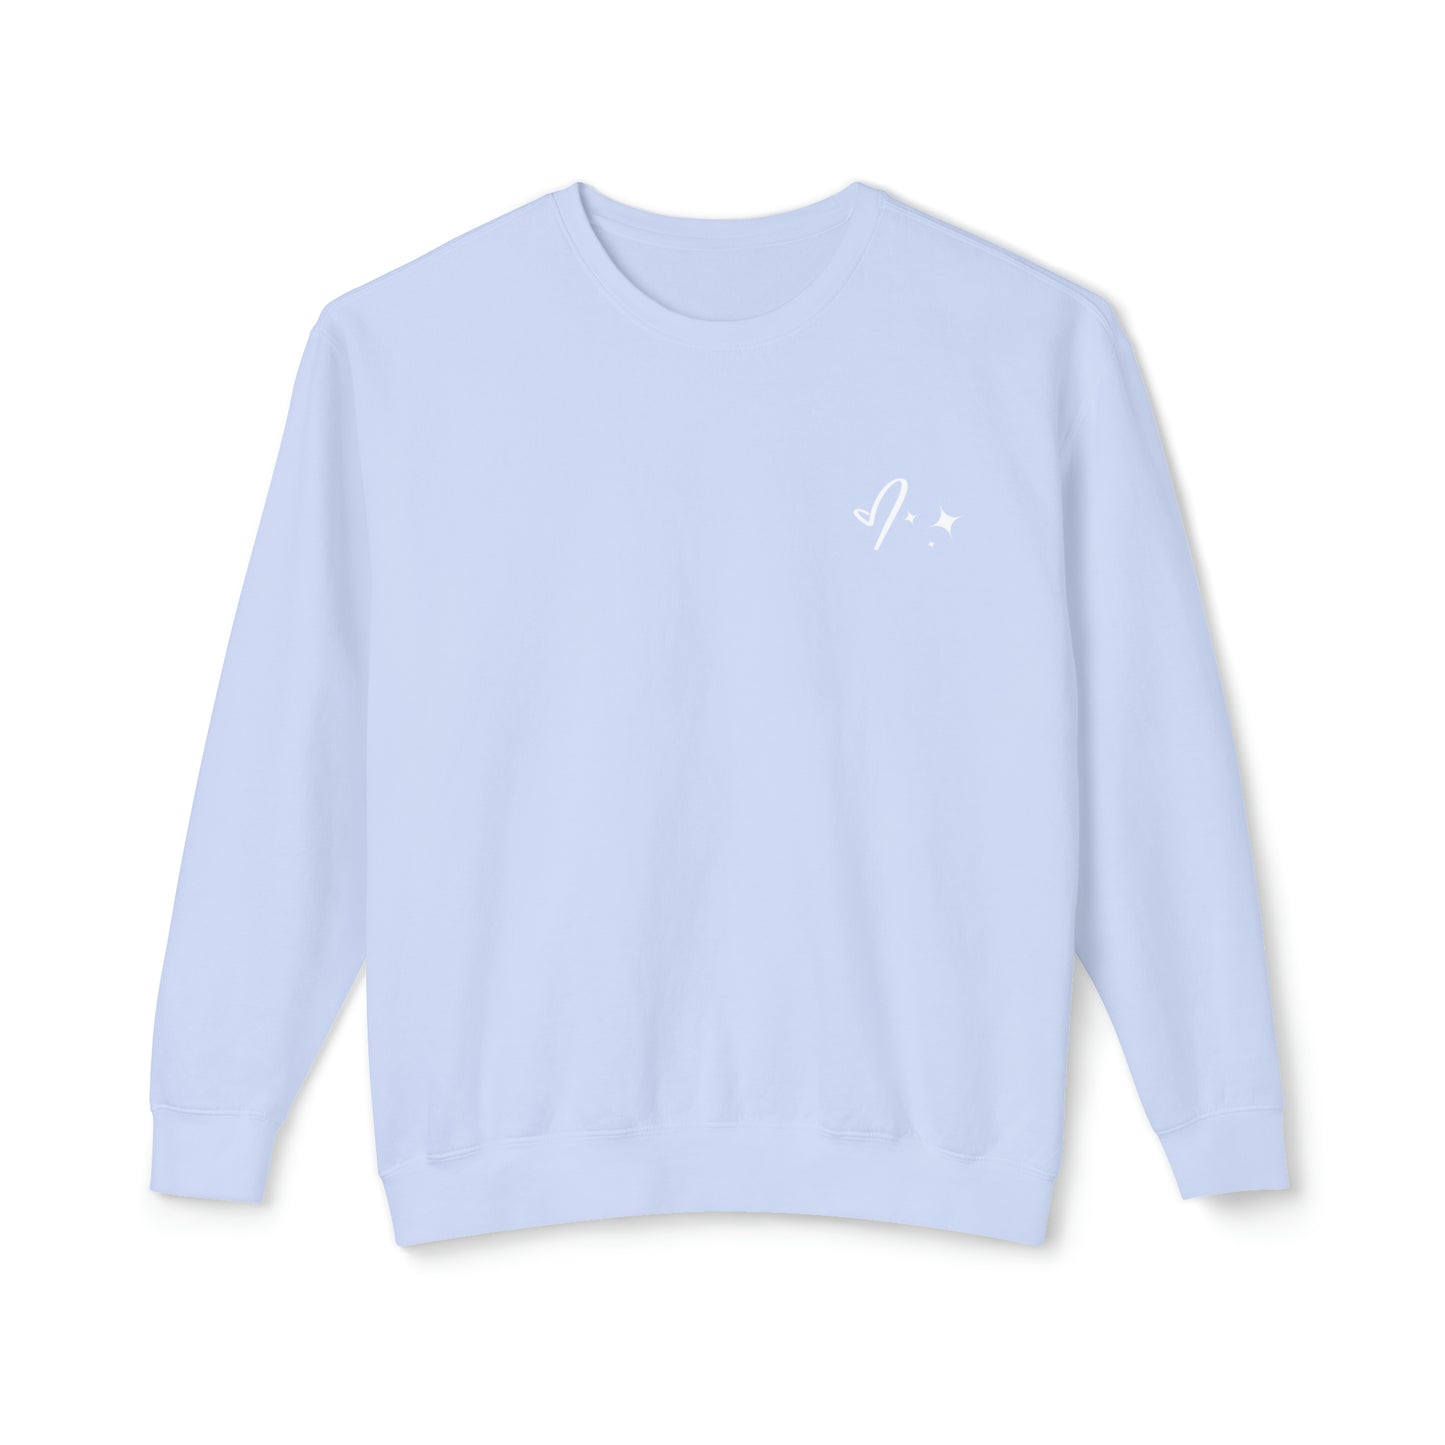 Don’t Quit Your Daydream Crewneck